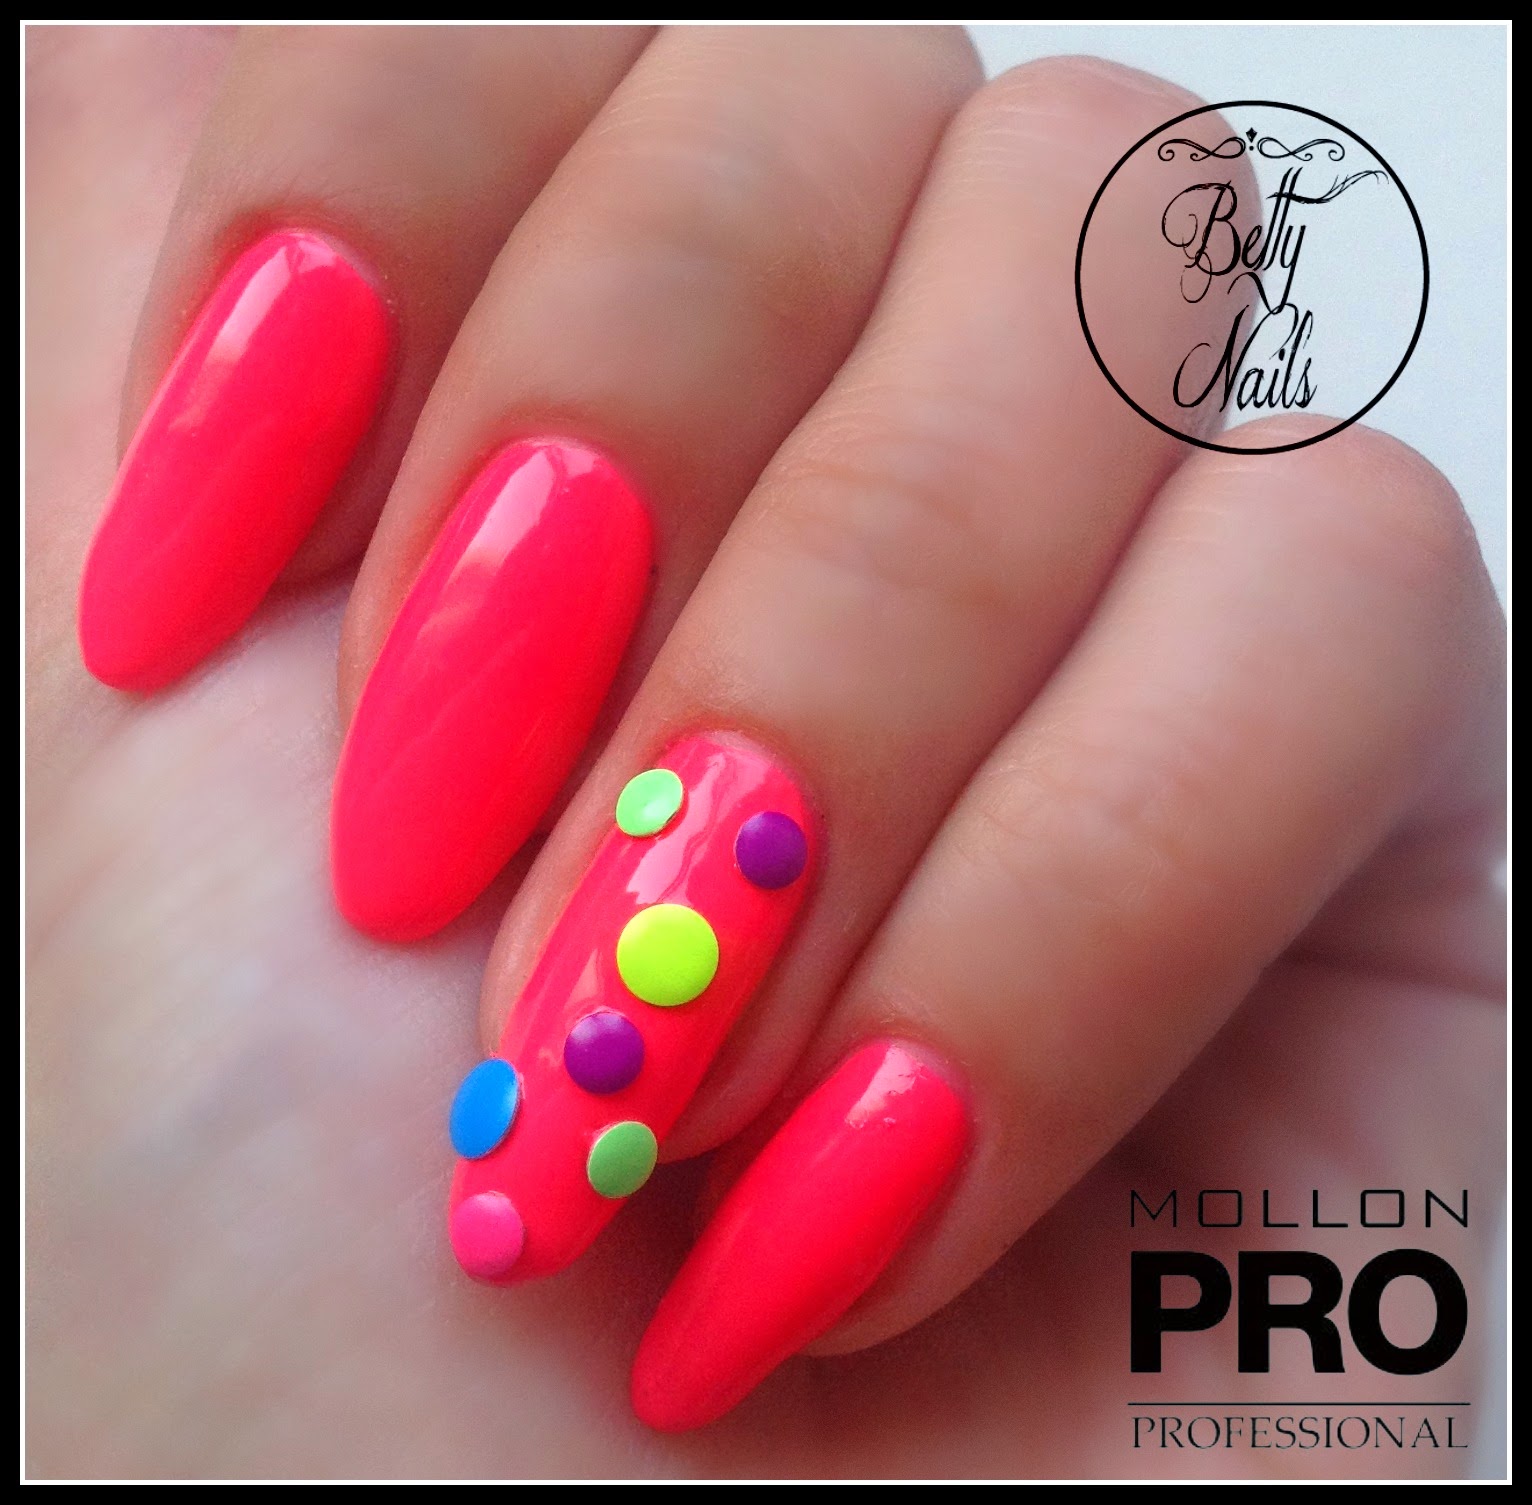 Betty Nails: Mollon Pro 183 Crystal + 182 Rush - Spring 2014 Collection